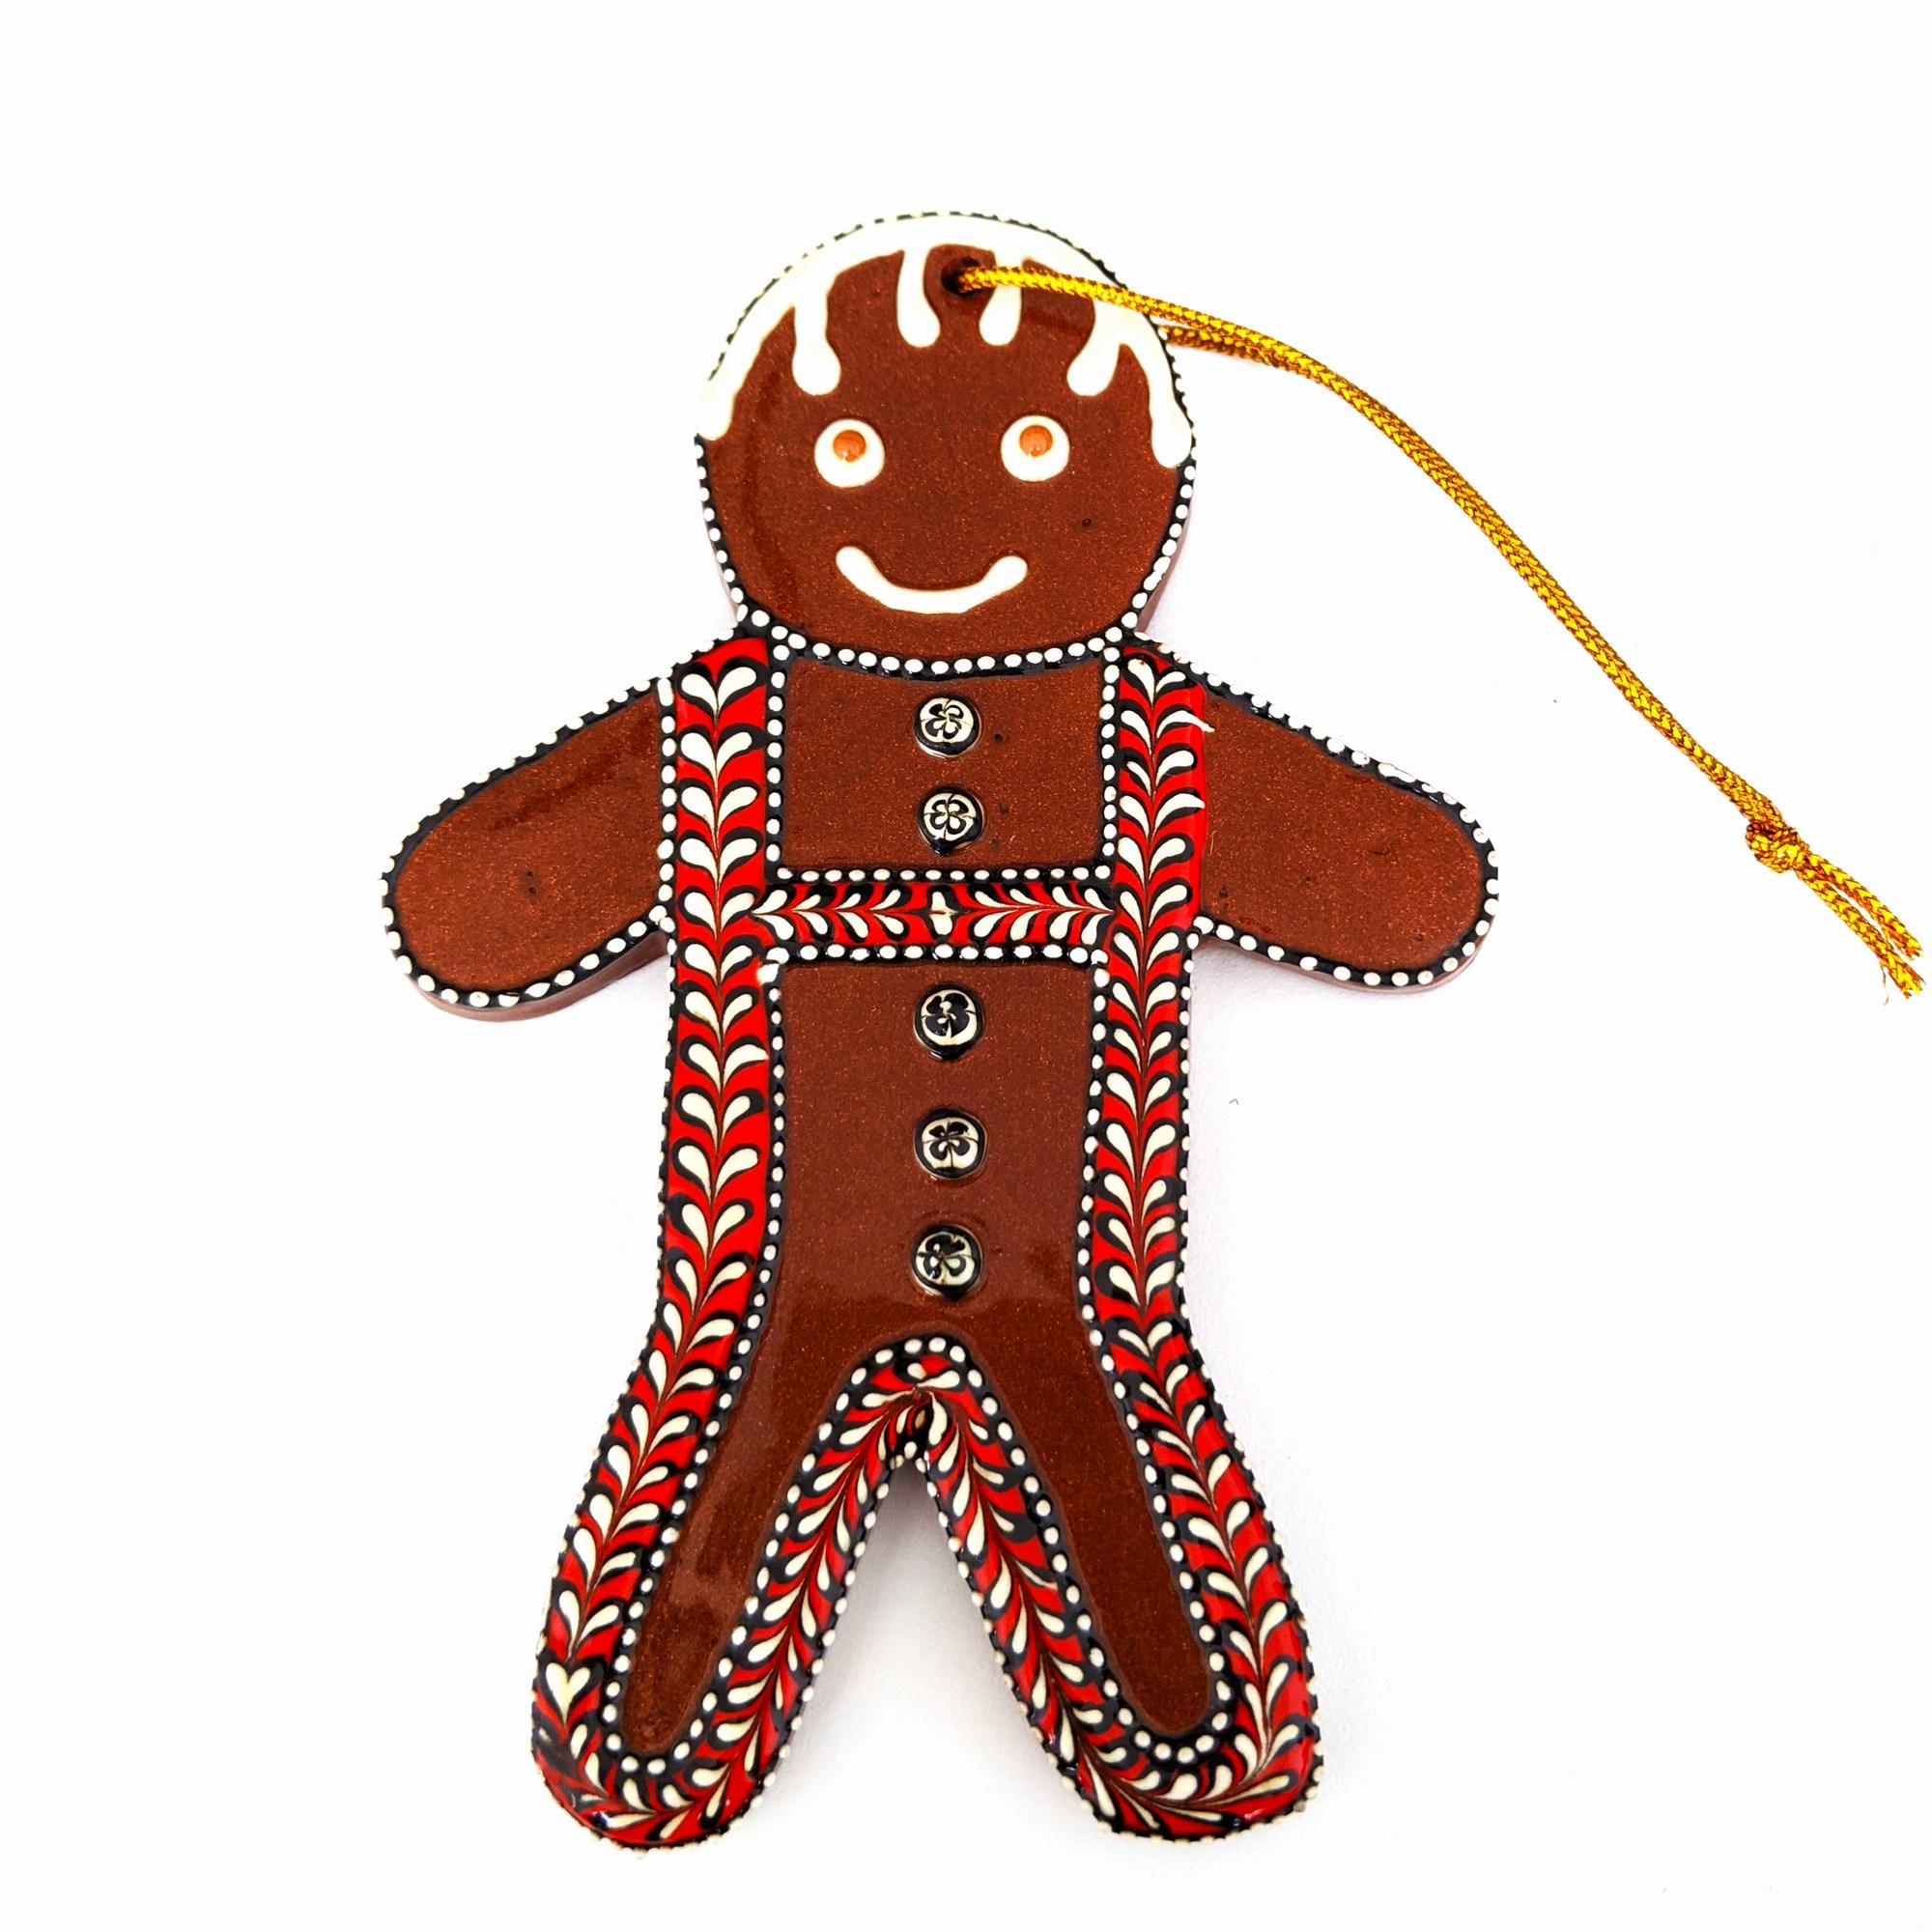 Gingerbread Man with Heart Suspenders and 5 Buttons - Sculpture by Irma Starr